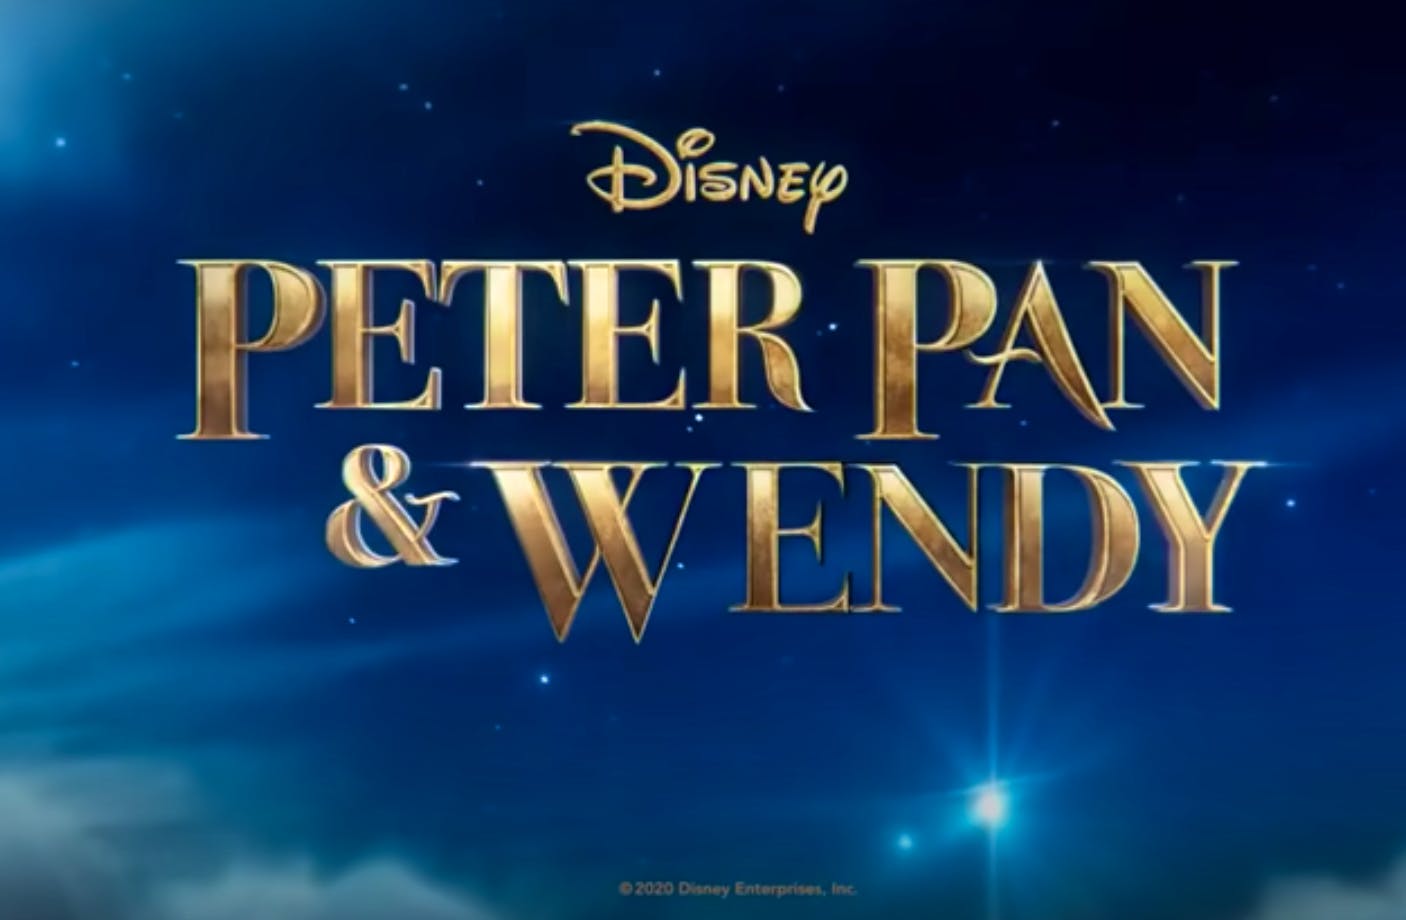 Peter Pan & Wendy Review - IGN